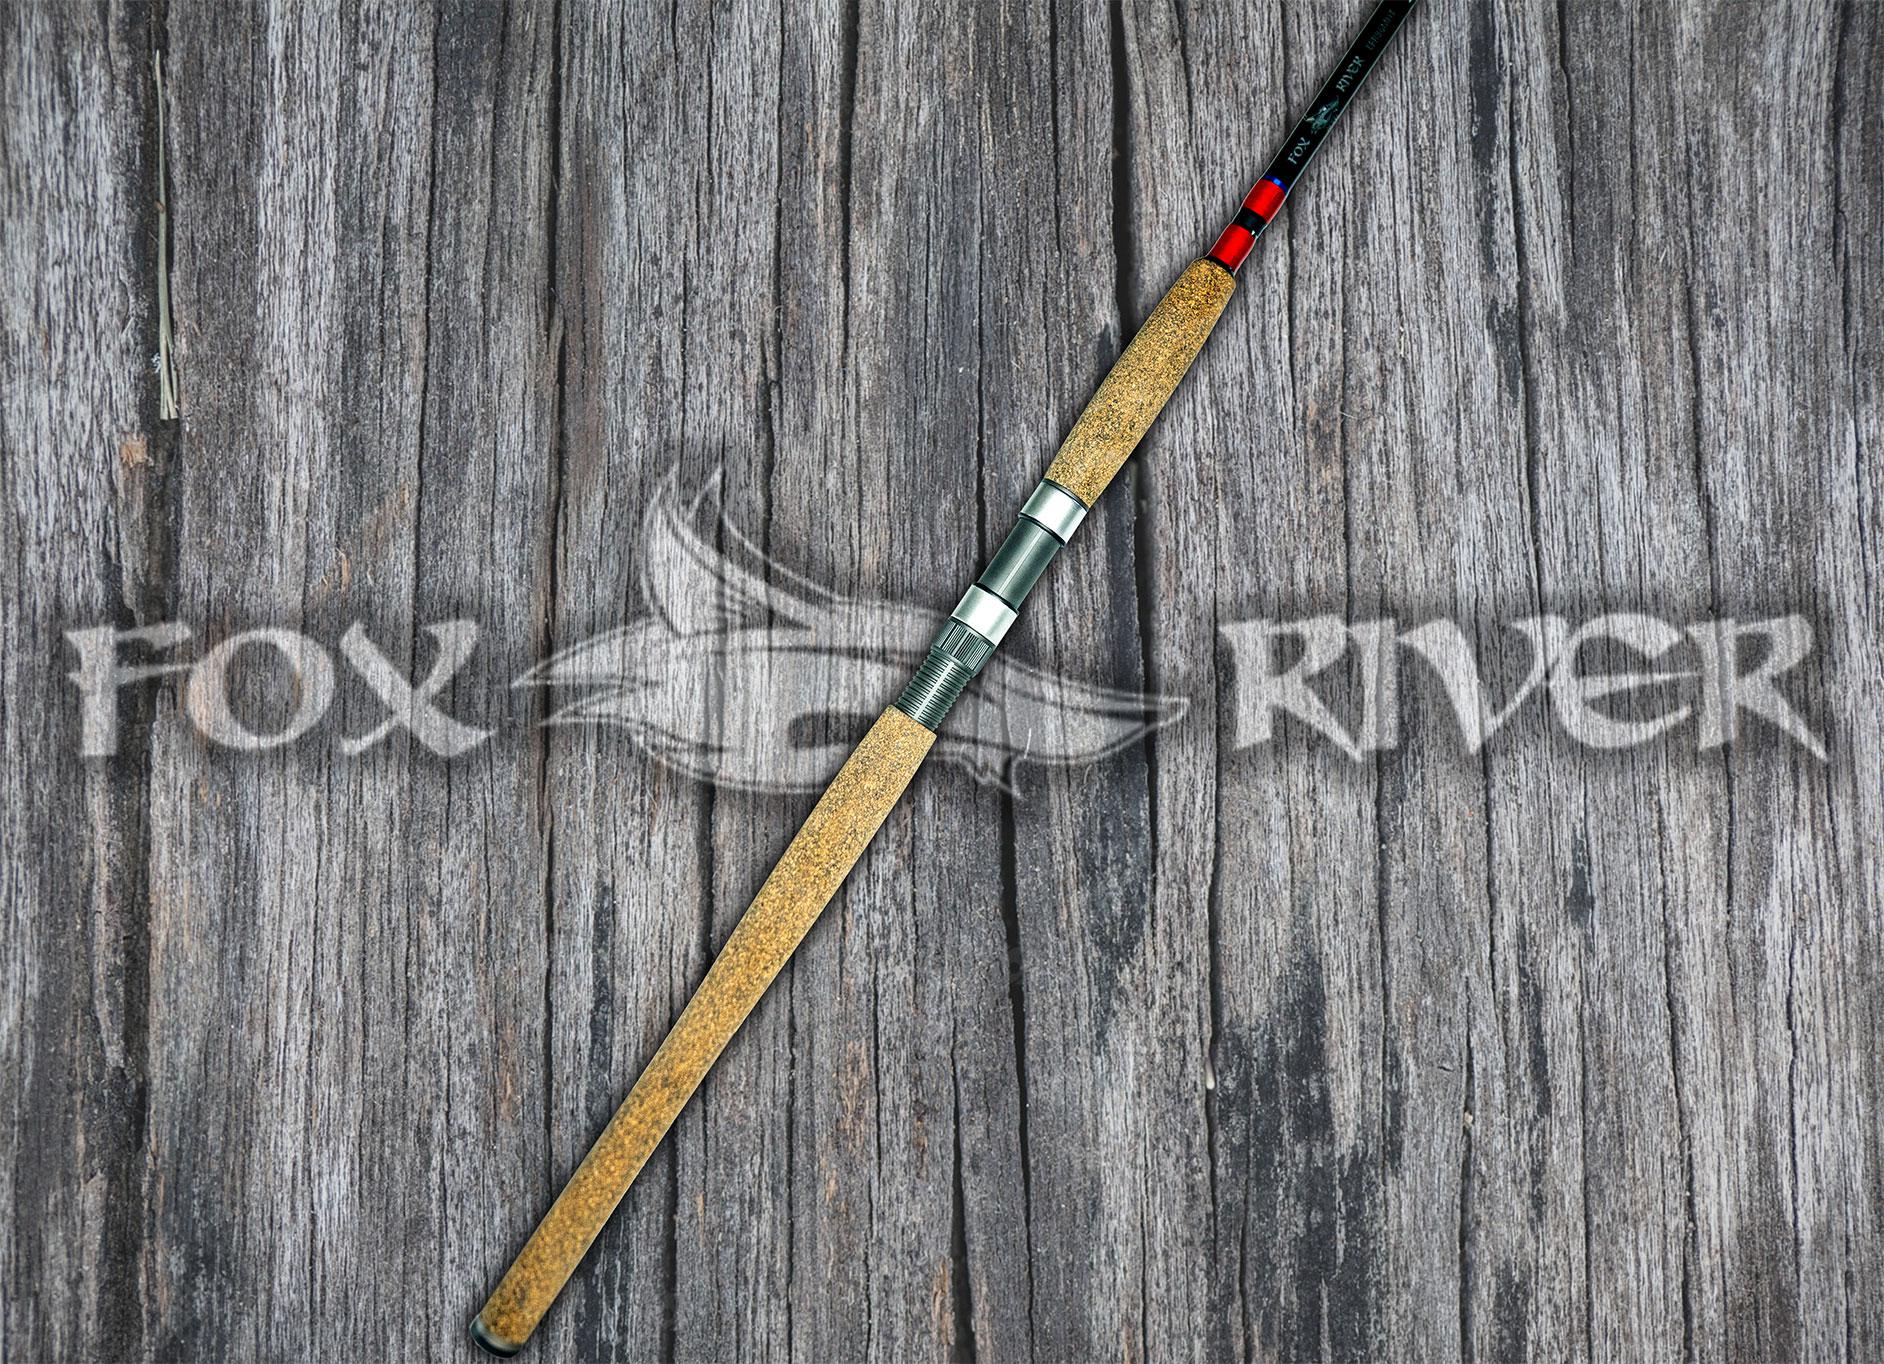 Fox River Lures and Rods - 8' 6 Medium Heavy Musky Trolling Rod (2 Piece)